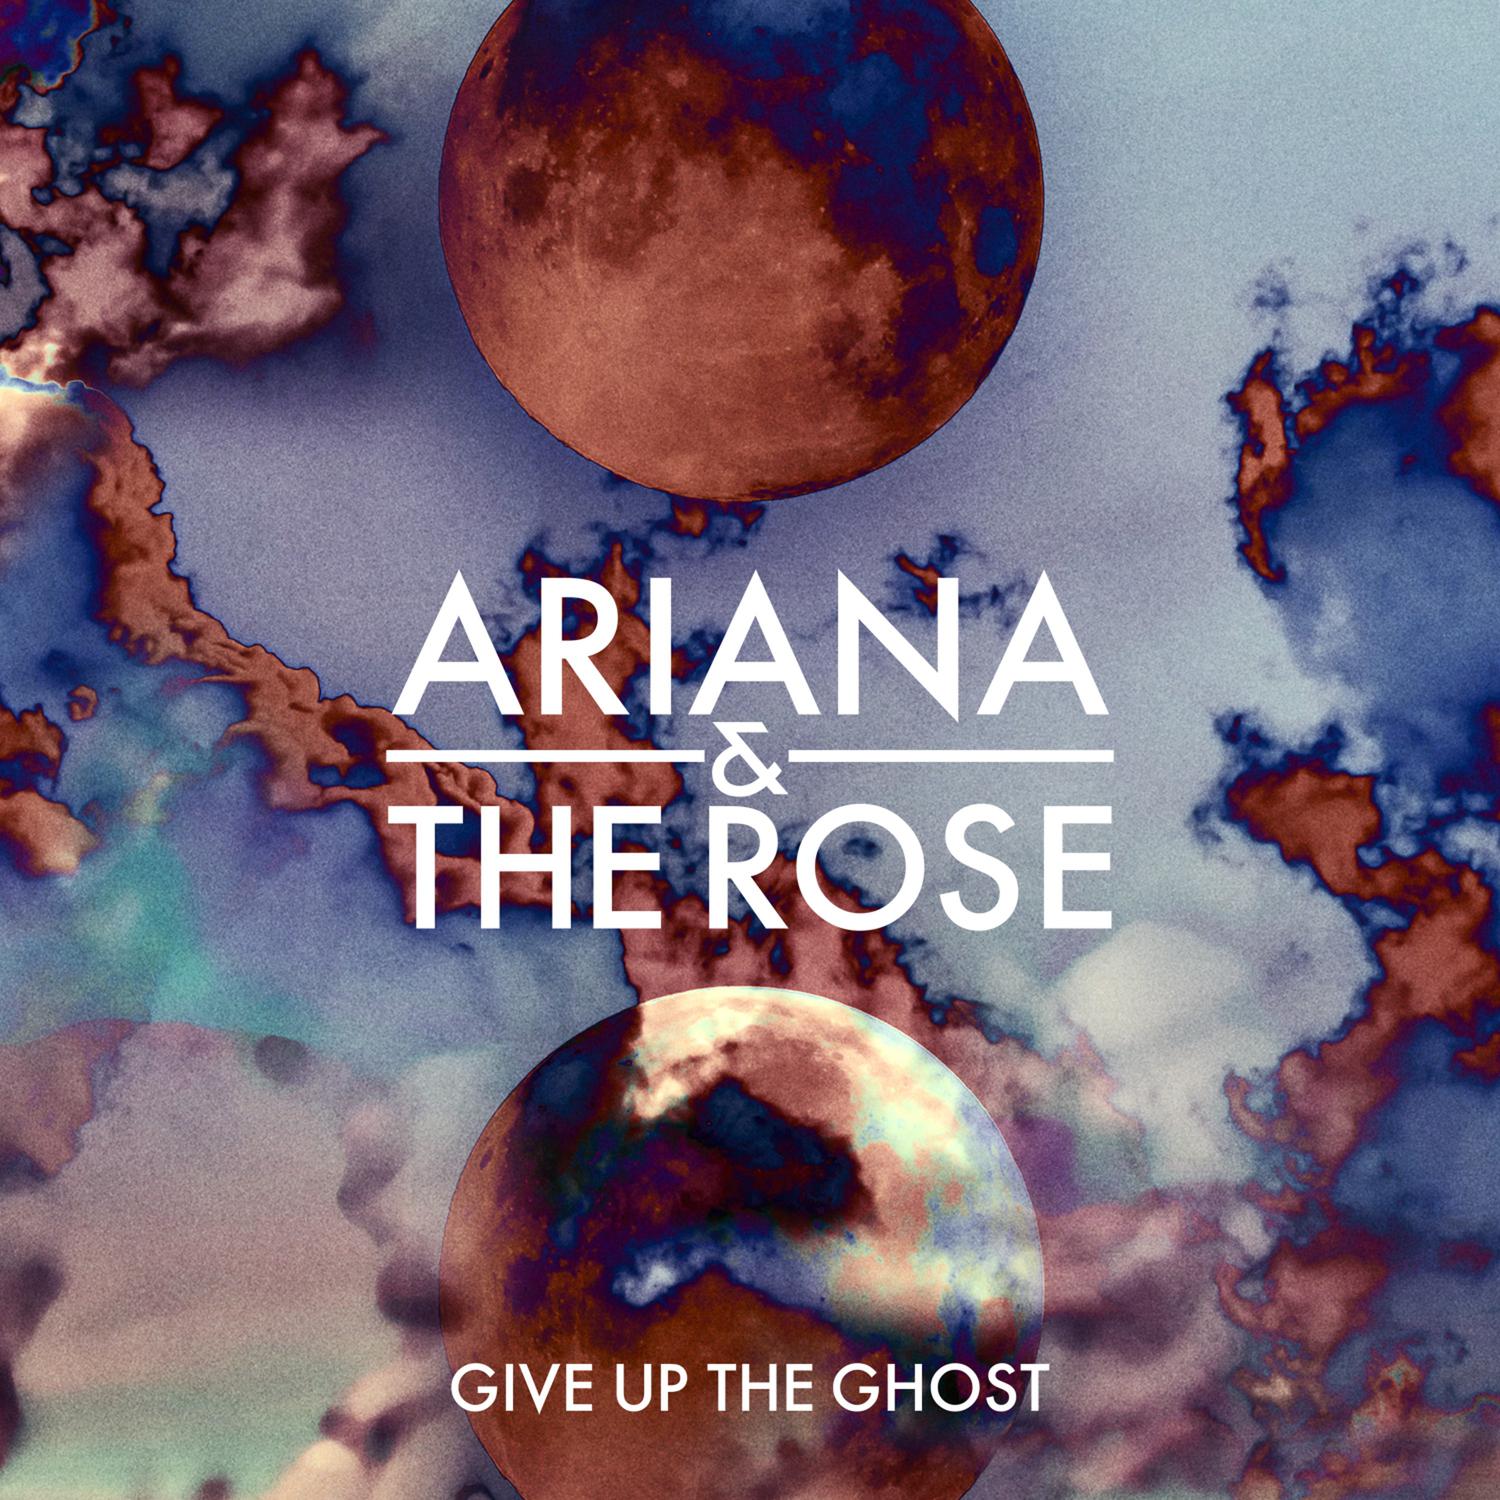 Ariana & the Rose - Give Up the Ghost